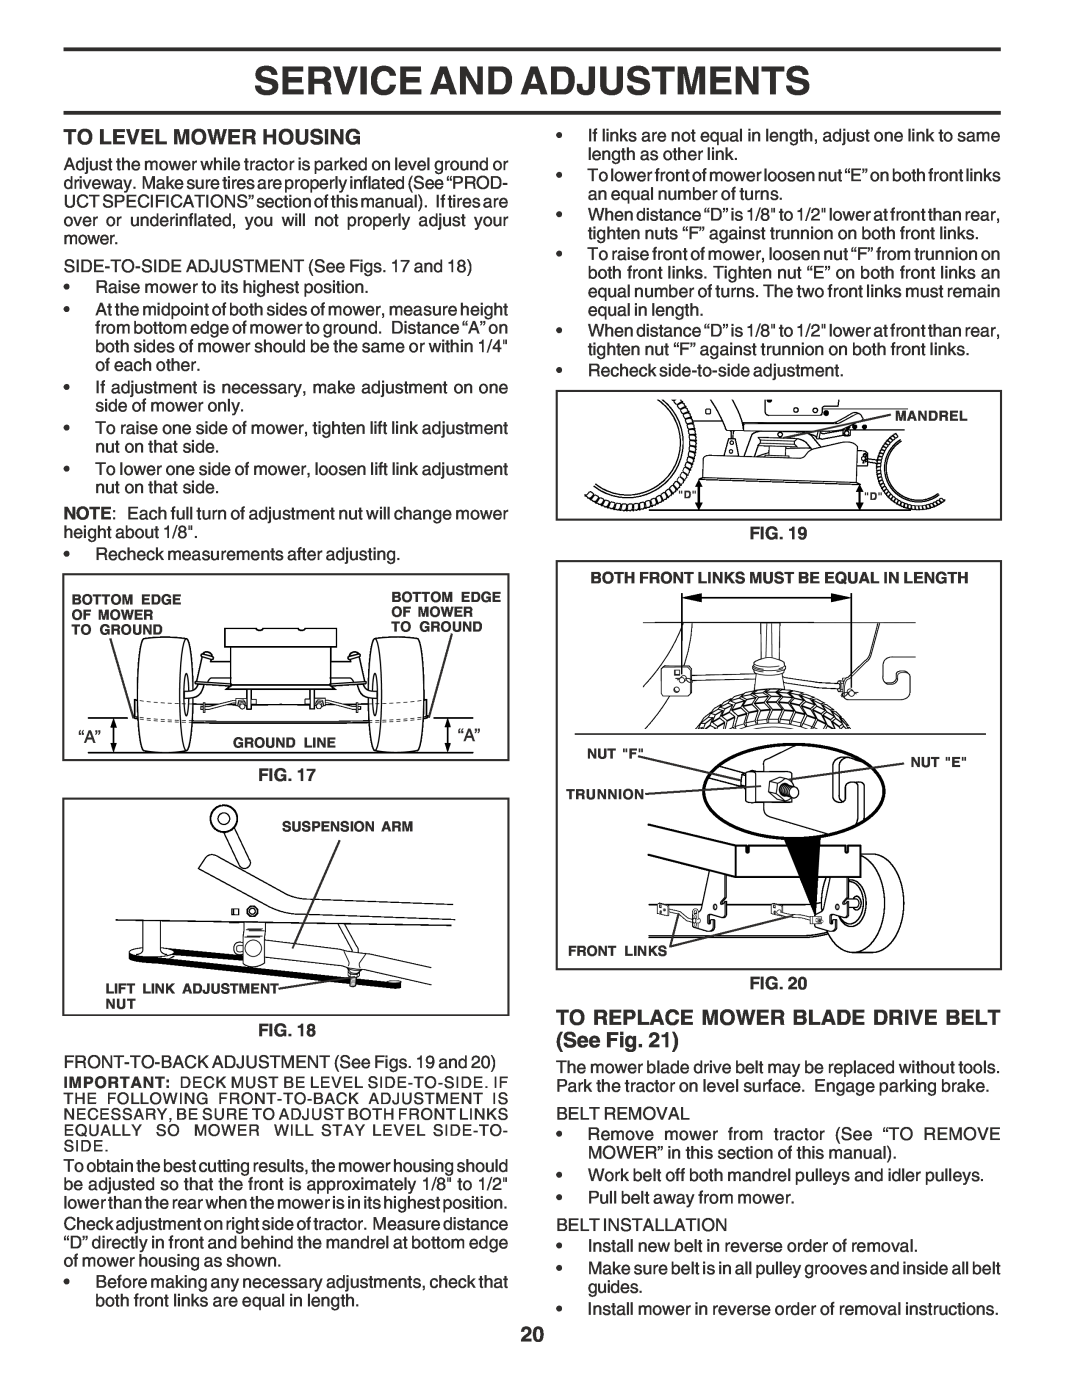 Poulan 181377 owner manual To Level Mower Housing, TO REPLACE MOWER BLADE DRIVE BELT See Fig, Service And Adjustments 